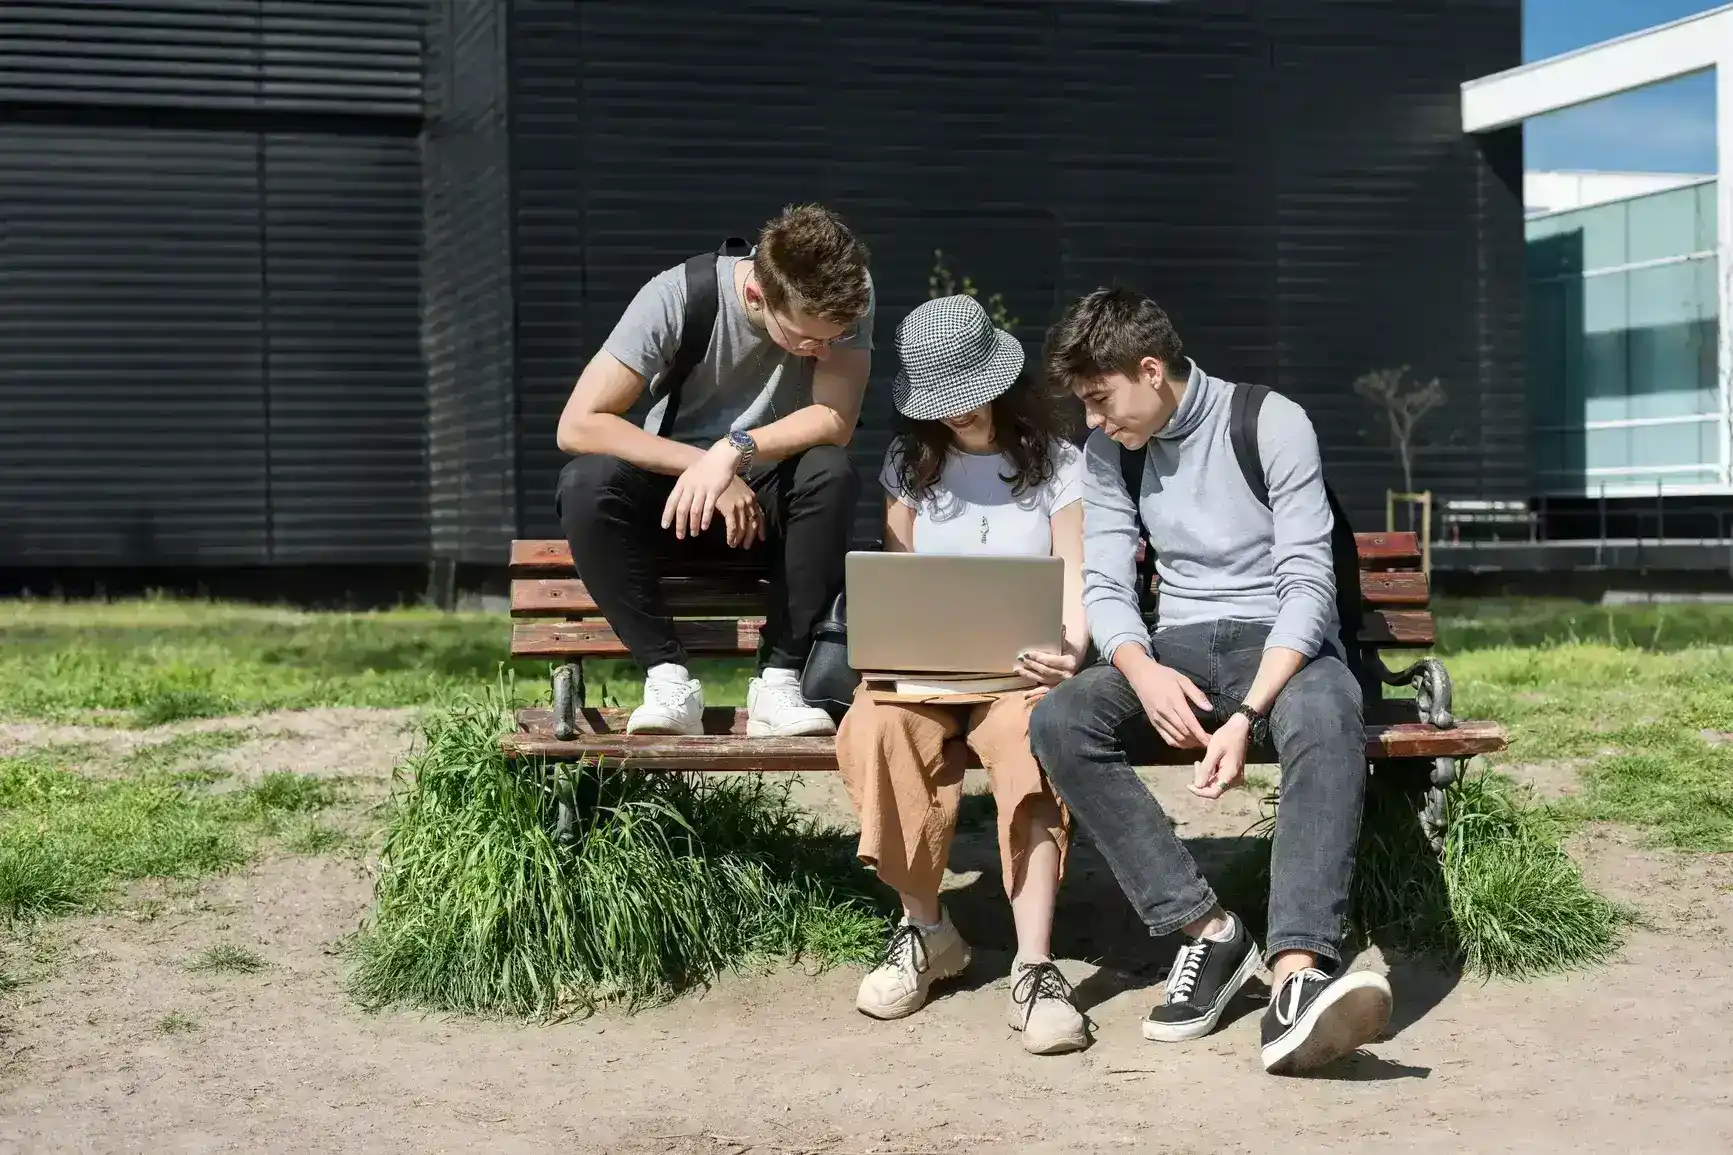 Three students are sitting on a park bench working on a presentation.